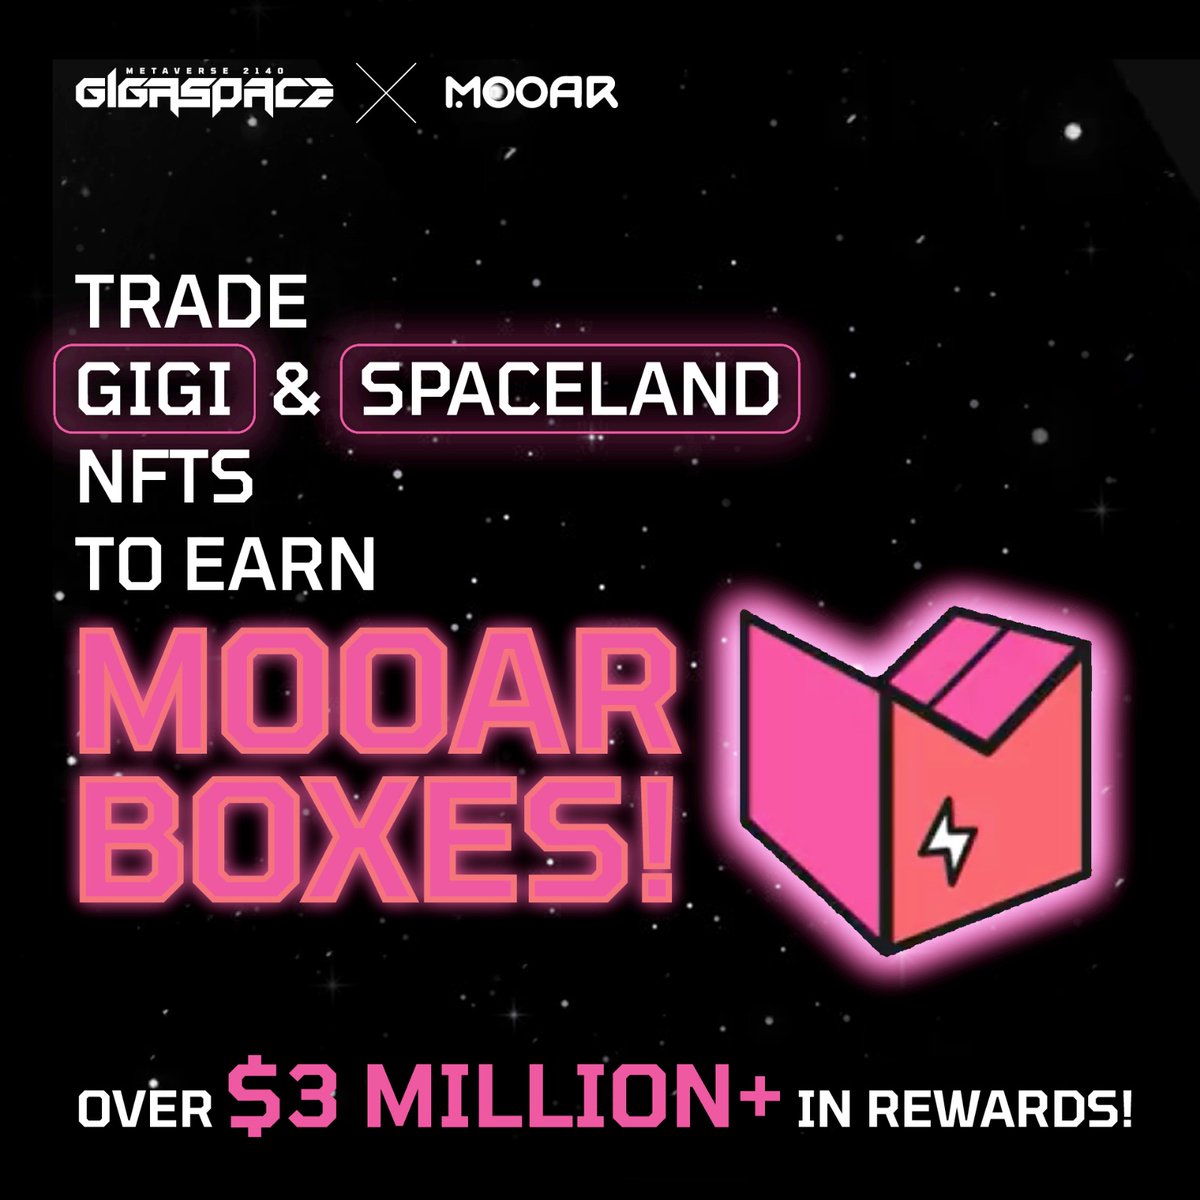 Trade GIGI & SPACELAND NFTs on @mooarofficial and unlock #MOOARBox rewards! 📦 The more you trade, the better your chances at premium rewards 🚀. Start trading on mooar.com today! Stay tuned for extra exciting incentives from GigaSpace coming your way soon! 👀